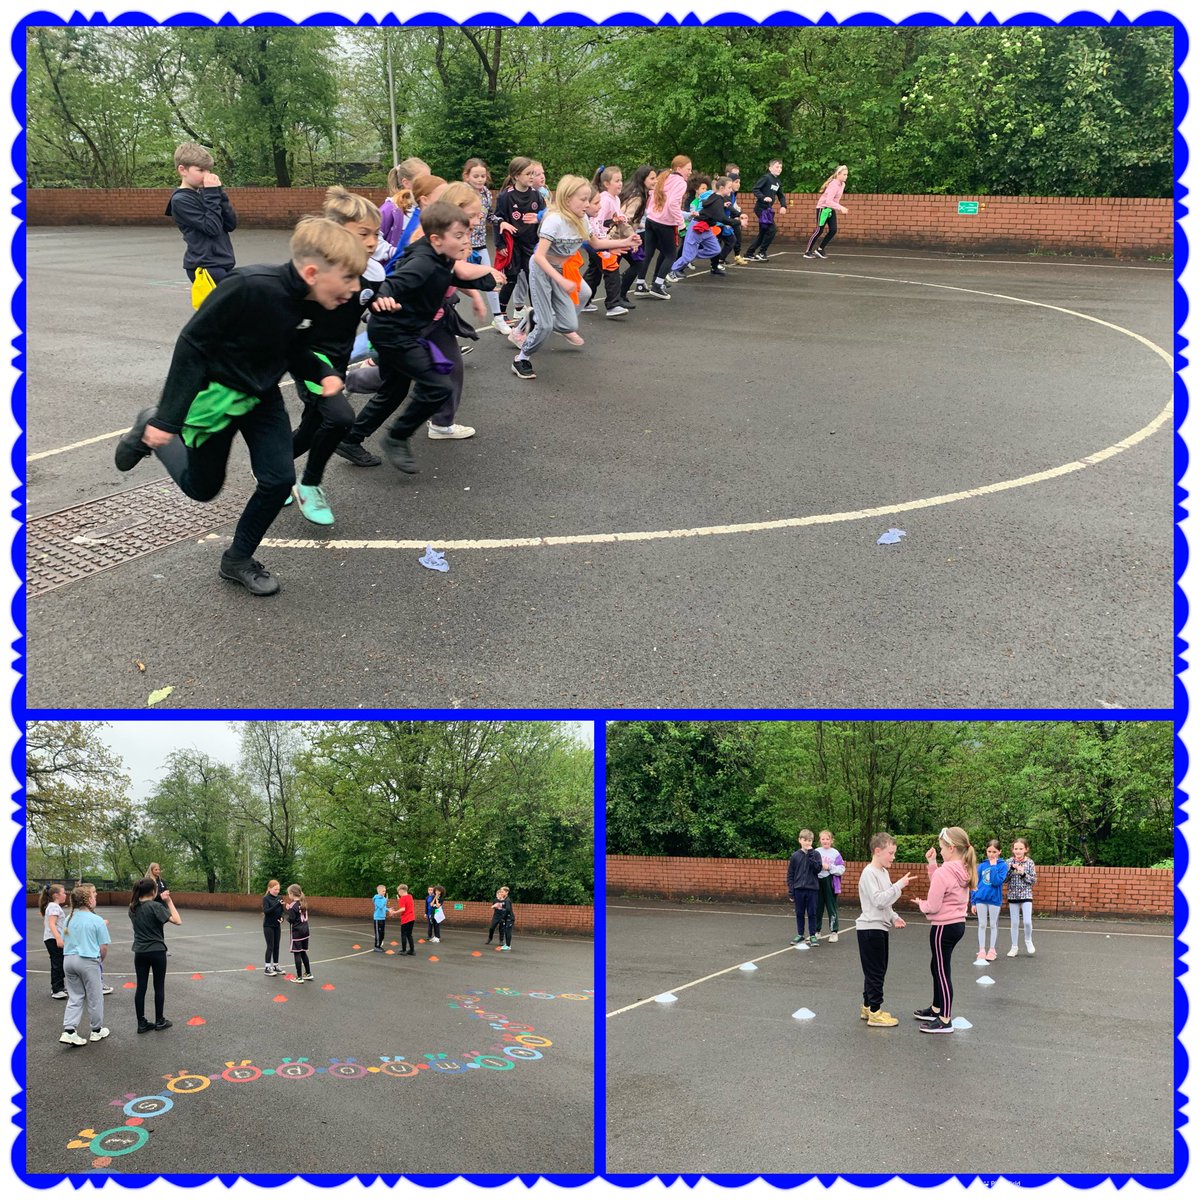 Dosbarth Helyg were brilliant team players today for our @CCFC_Foundation session! ⚽️ 🥅 🥇 #HealthyHywel #TEAMOaklands